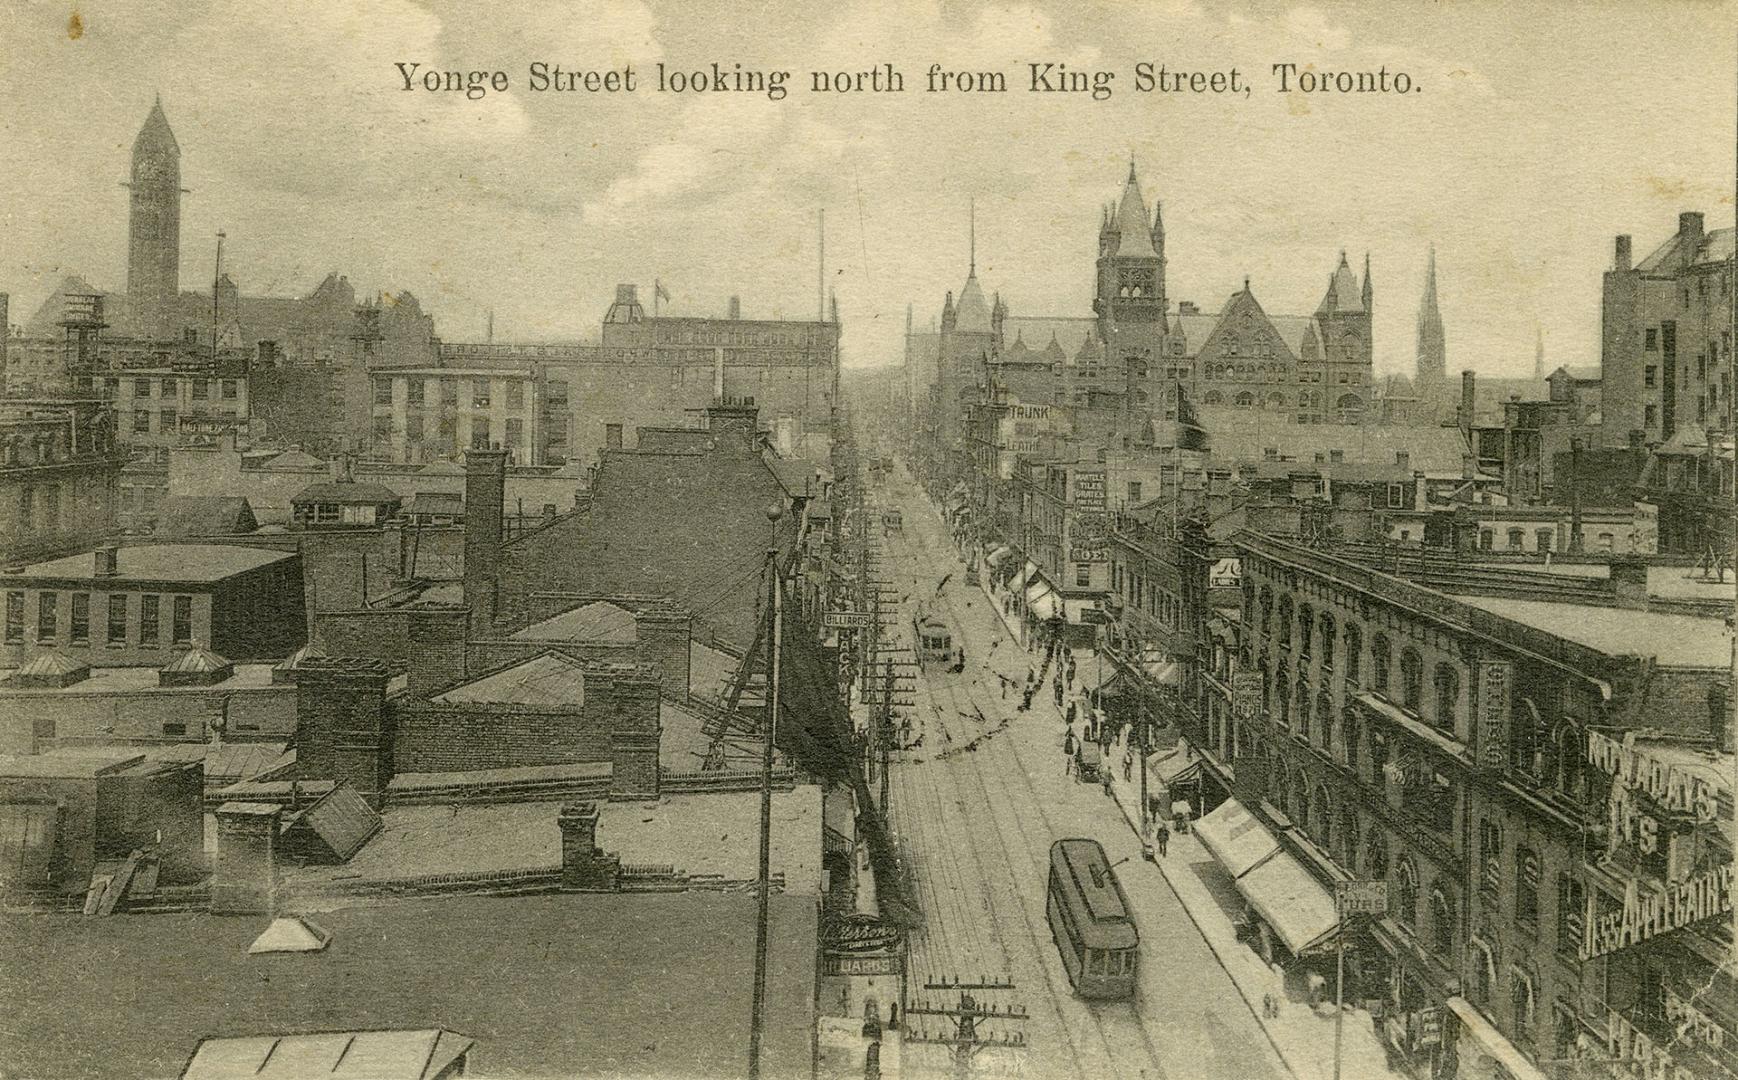 Black and white photo postcard depicting an an aerial view of Yonge Street with street cars and ...